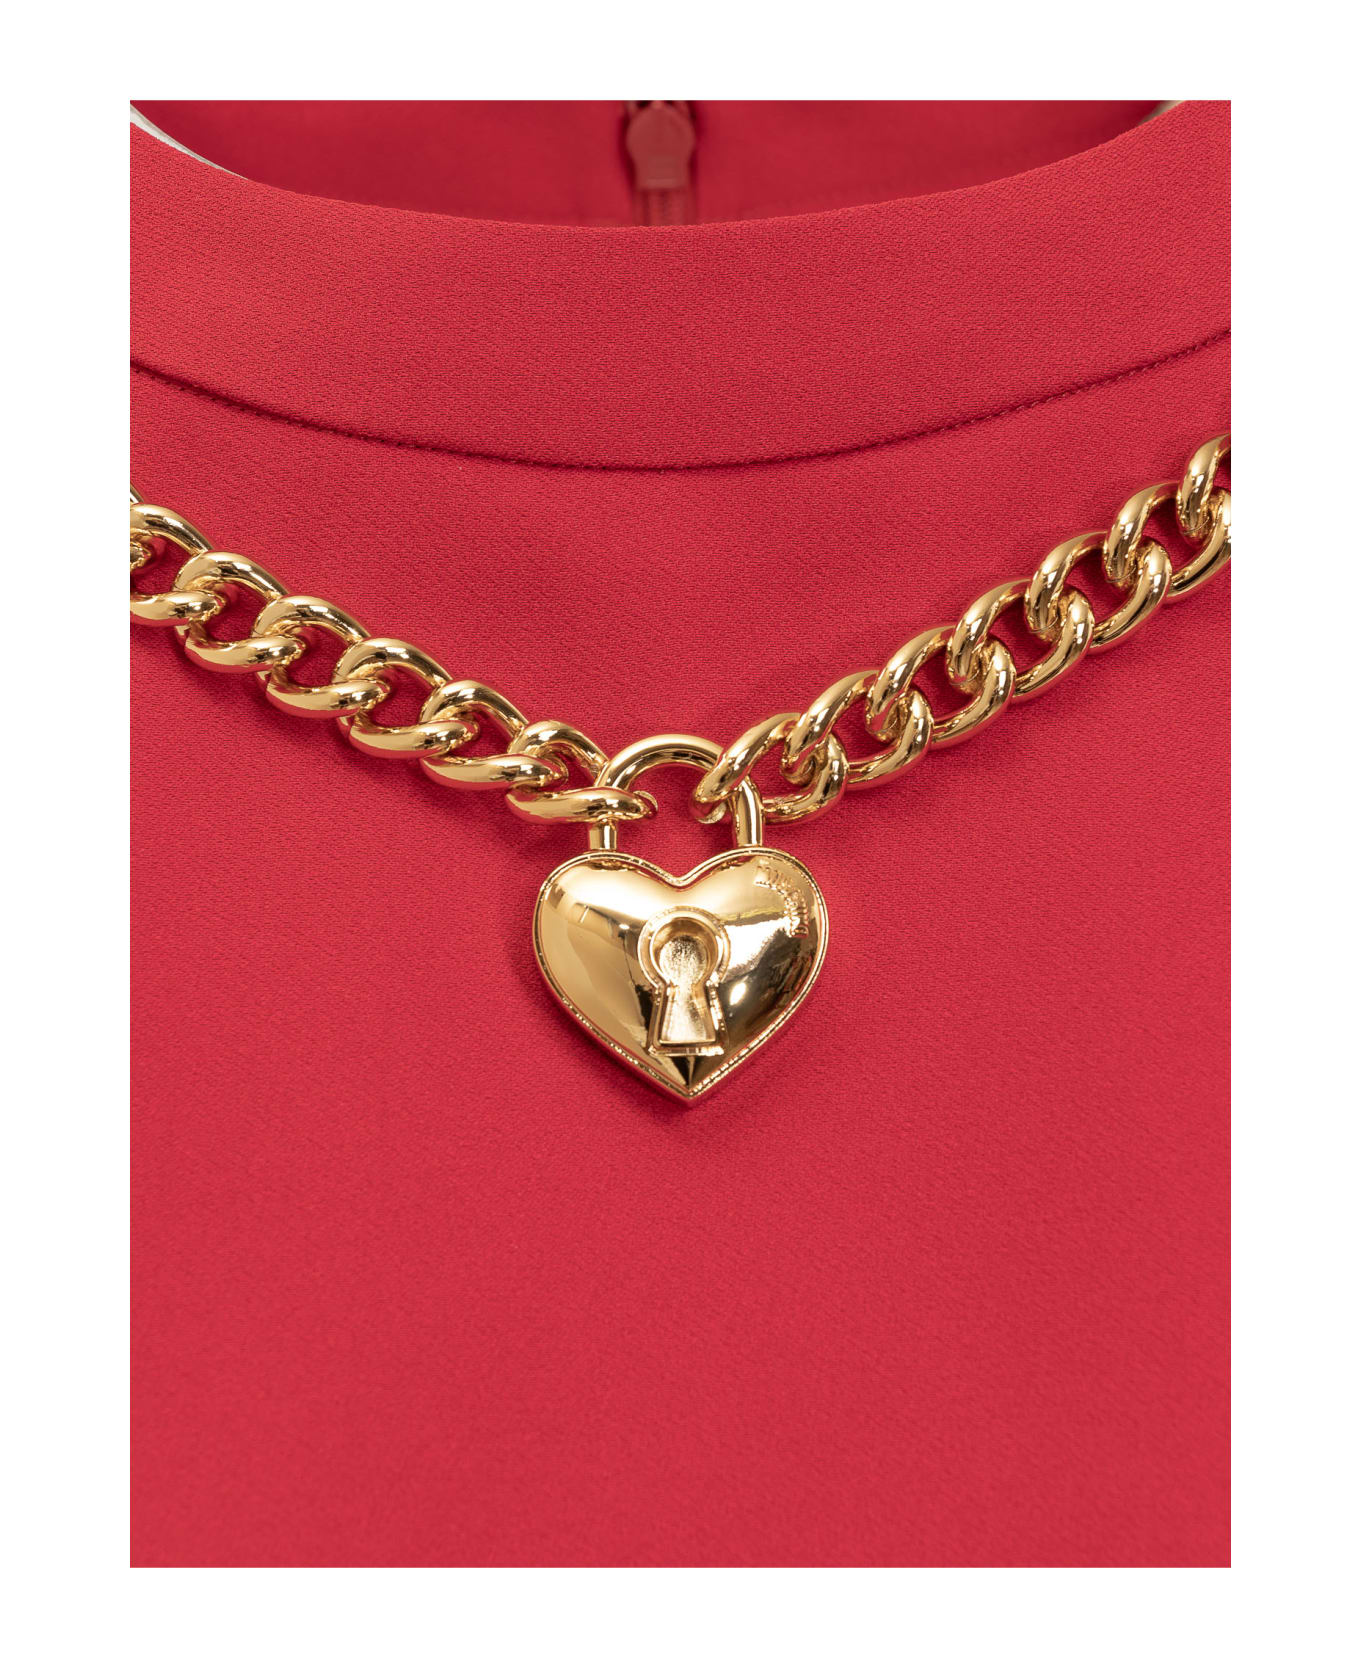 Moschino Chain And Heart Dress - FANTASIA ROSSO